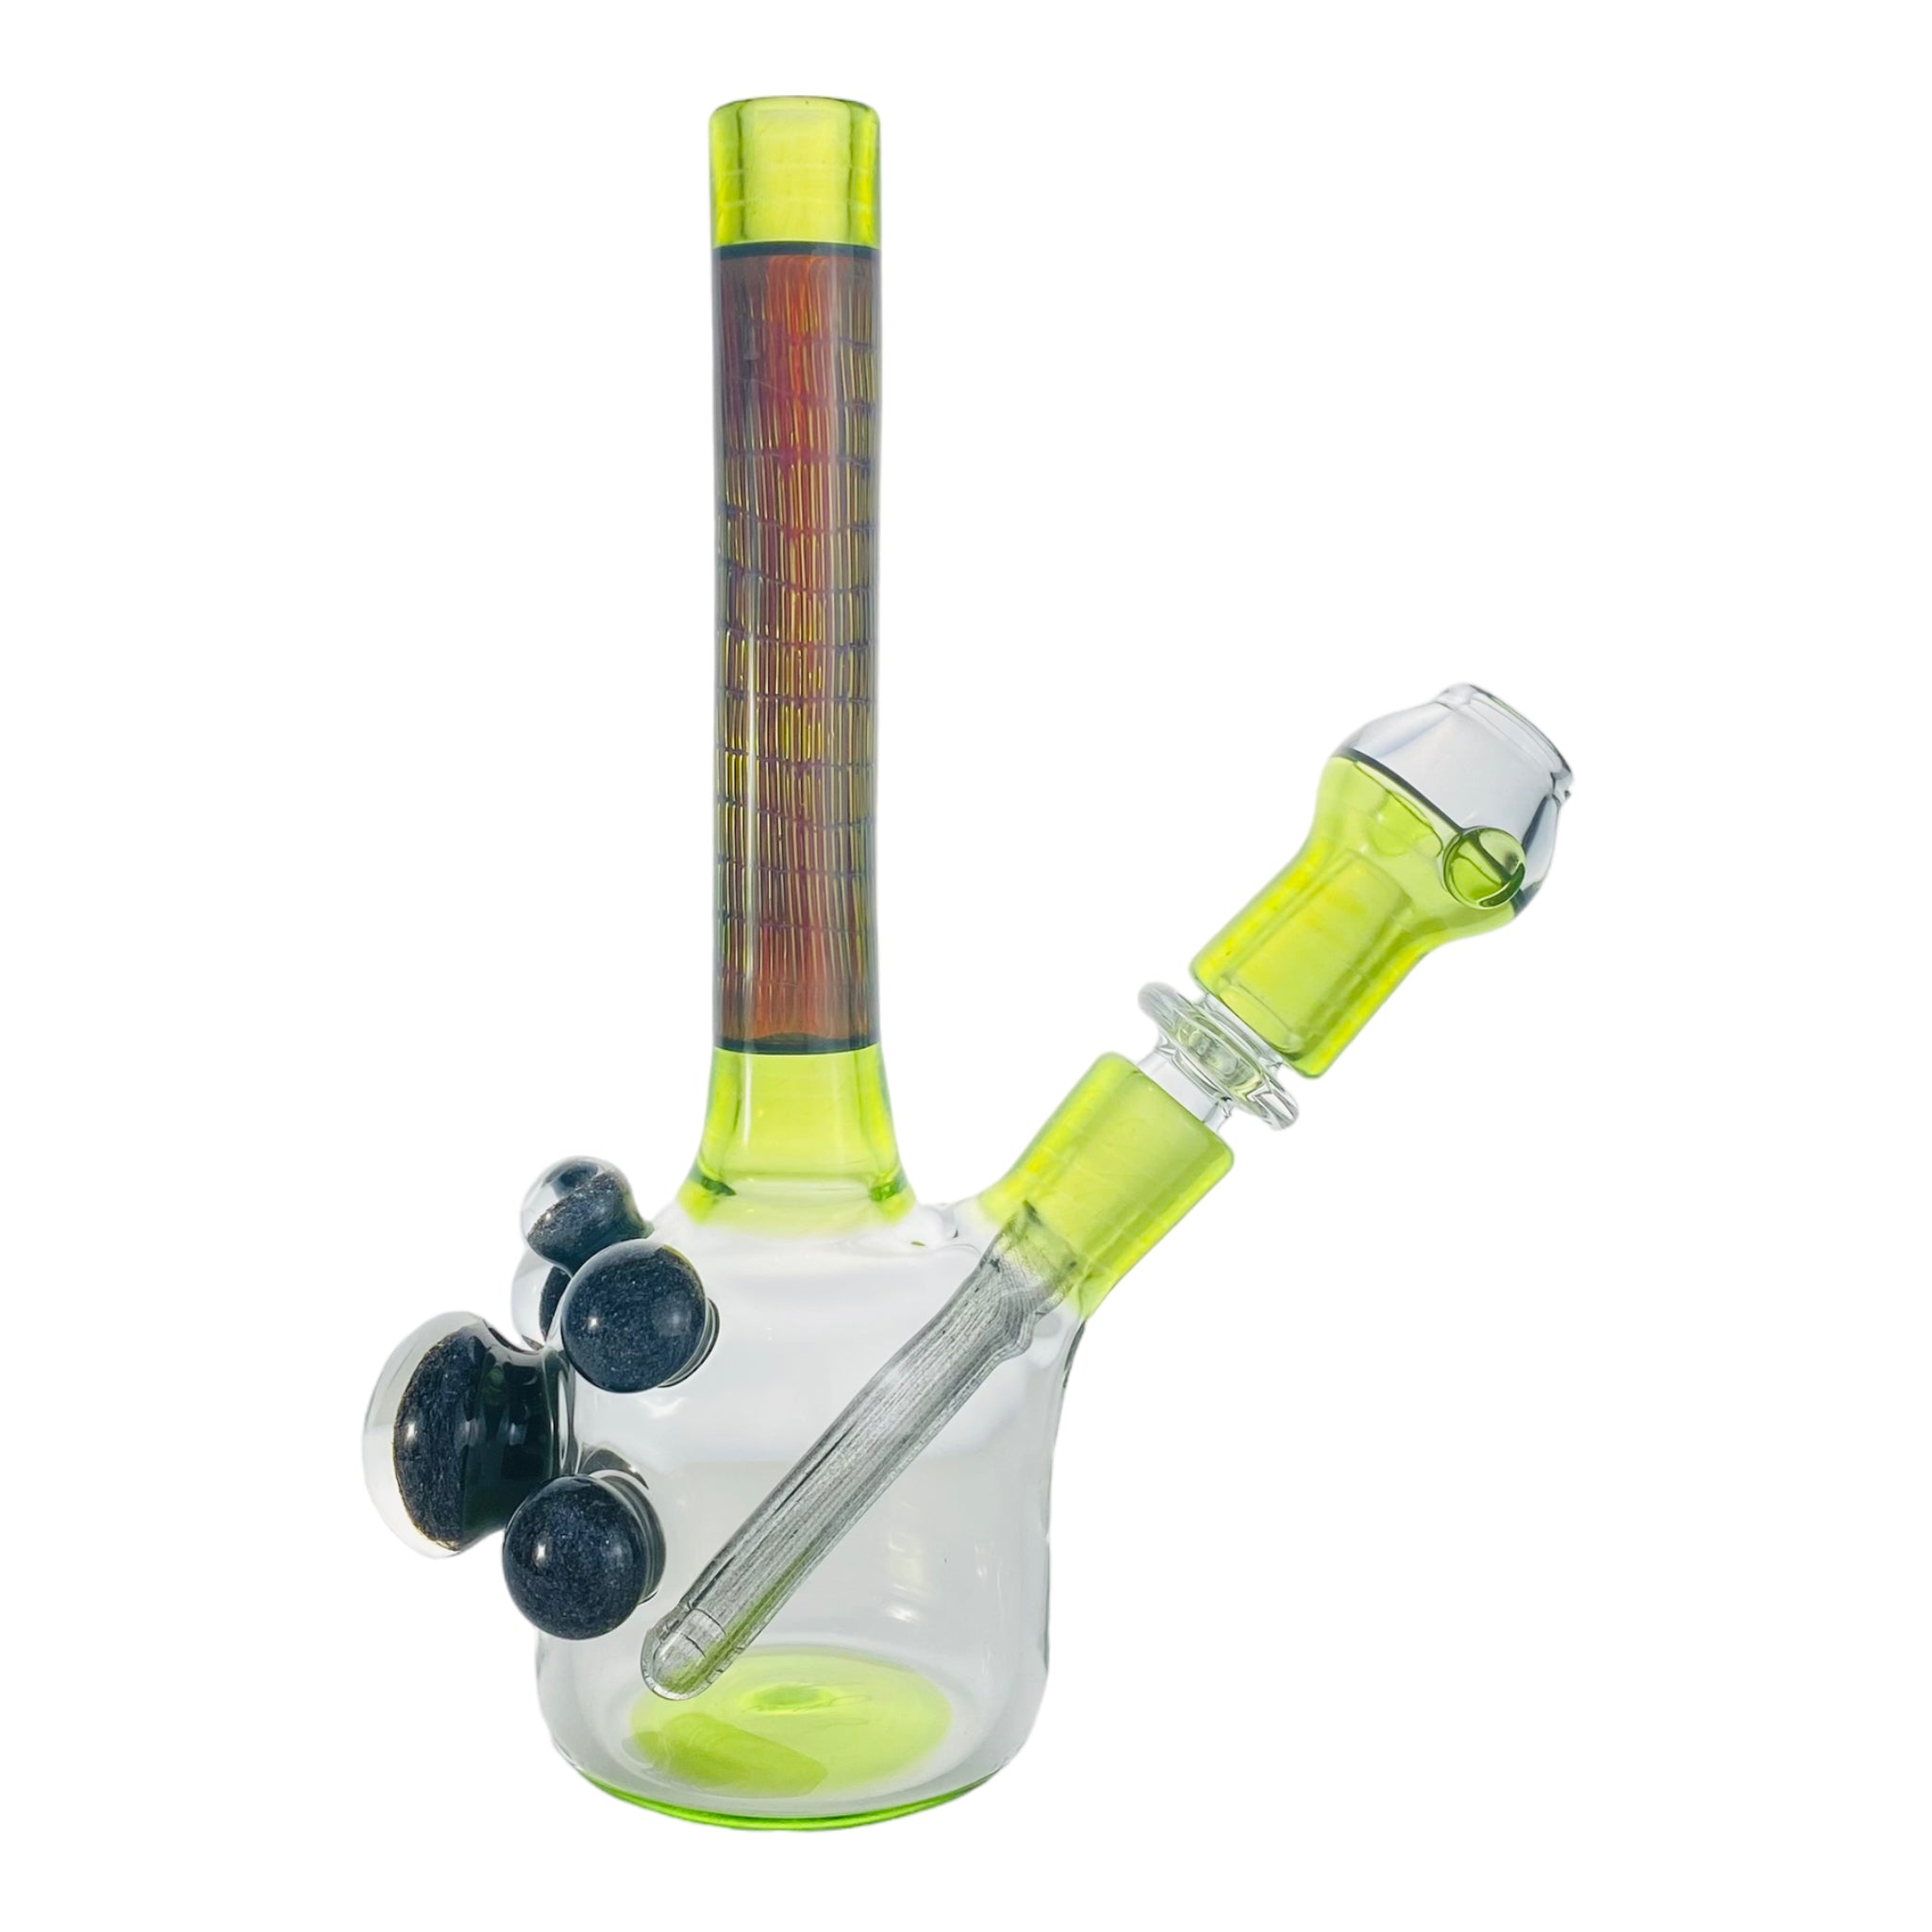 Dave Park Glass - Sublime Green Mini Tube Dab Rig With Bamboo Air Trap Neck